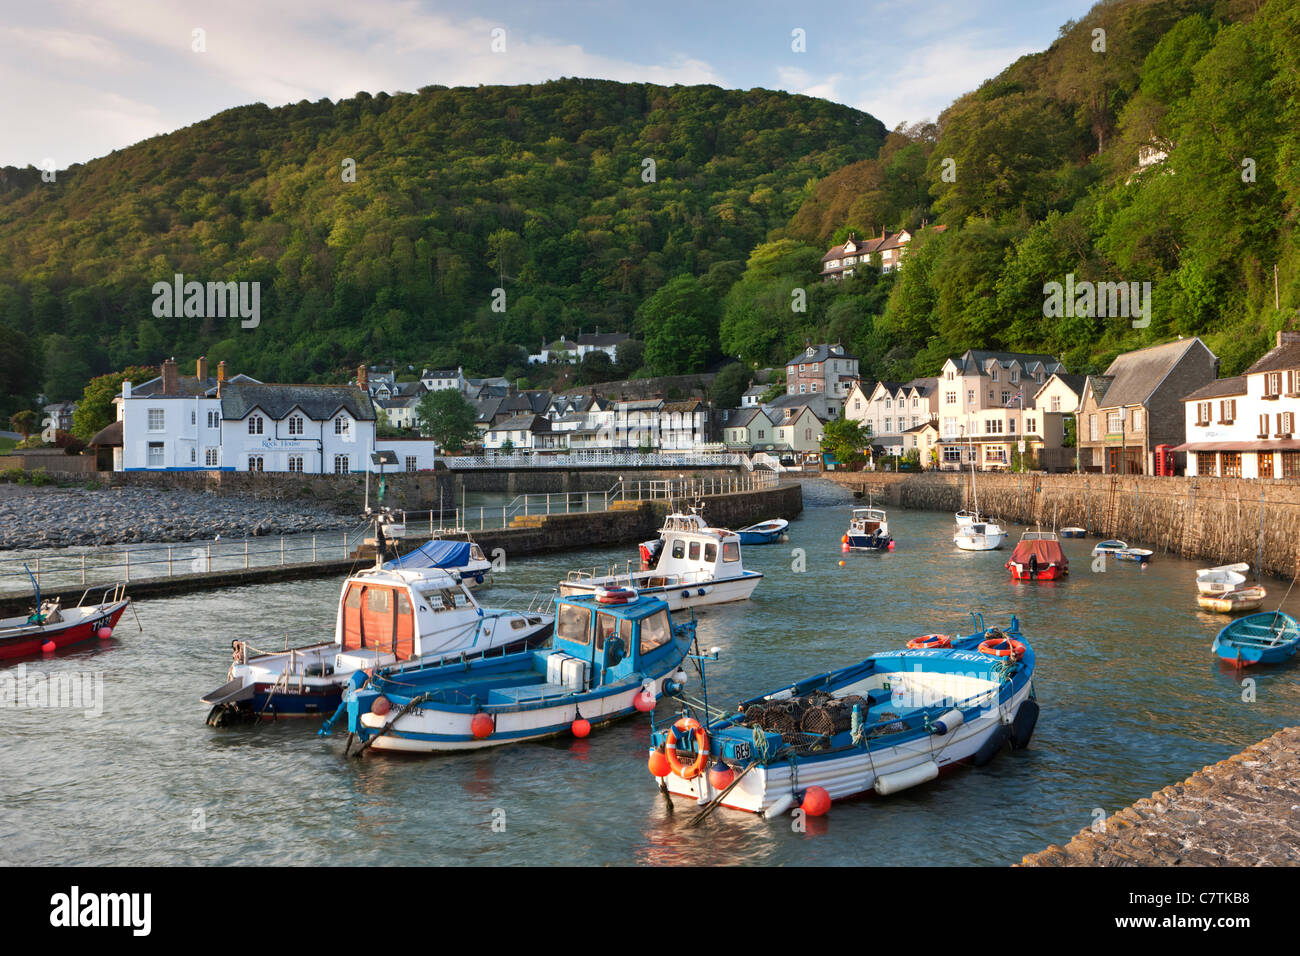 Lynmouth Harbour e barche, Parco Nazionale di Exmoor, Somerset, Inghilterra. Foto Stock